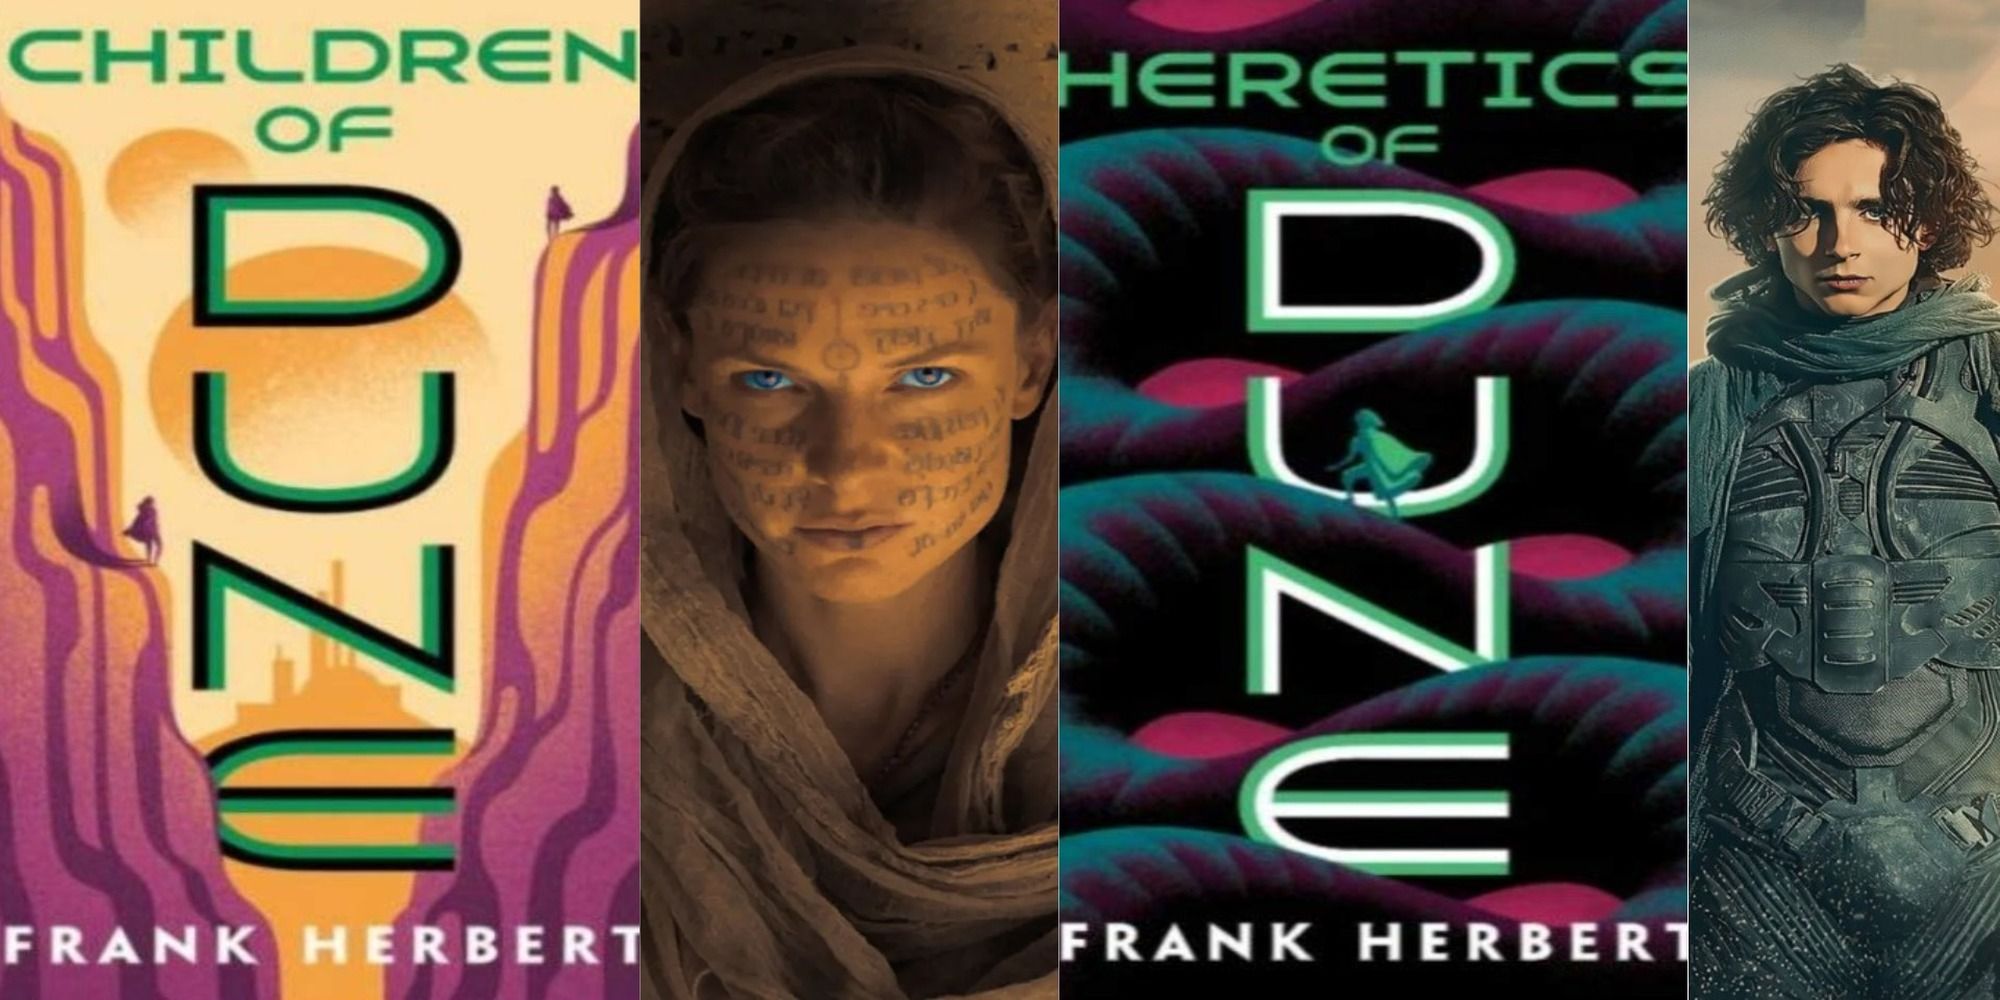 title dune chars from the sequels Children of Dune Jessica Heretics of Dune Paul 